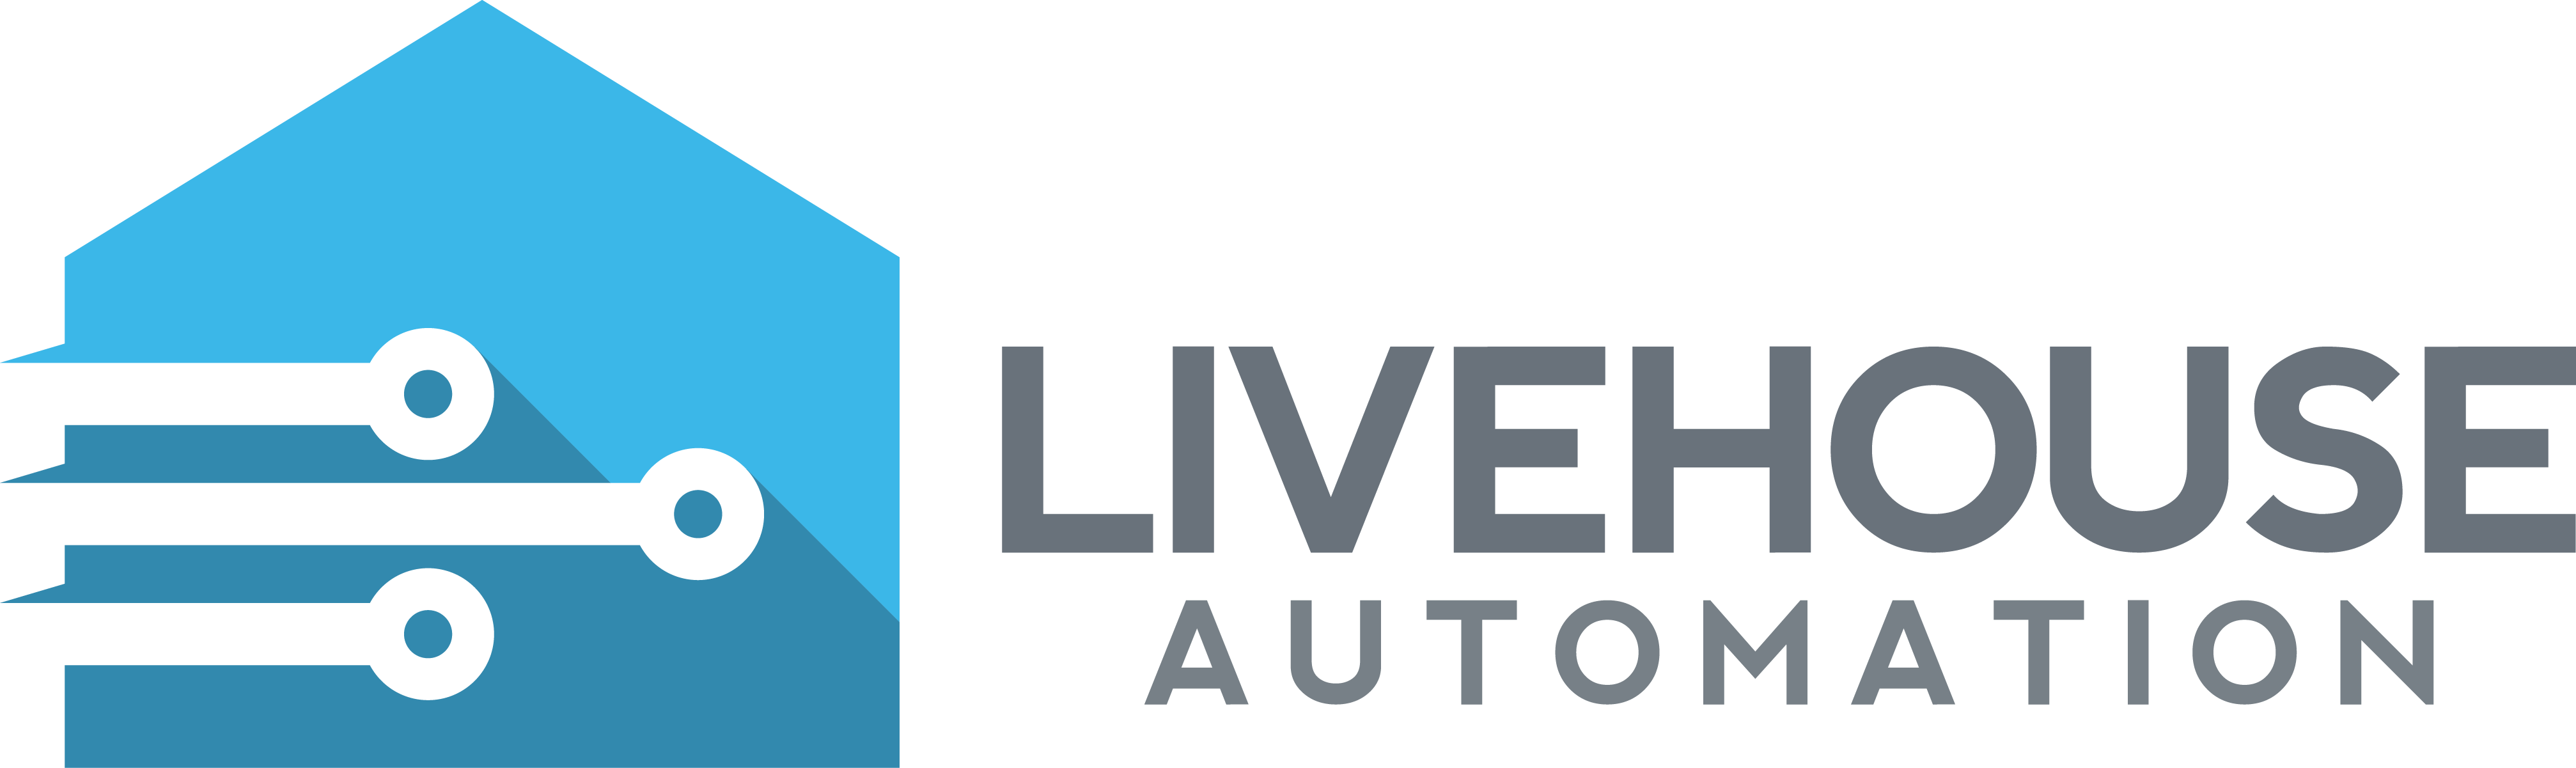 LiveHouse Automation provides a range of products for the DIY enthusiast, self installation kits or fully designed Home Automation solutions.